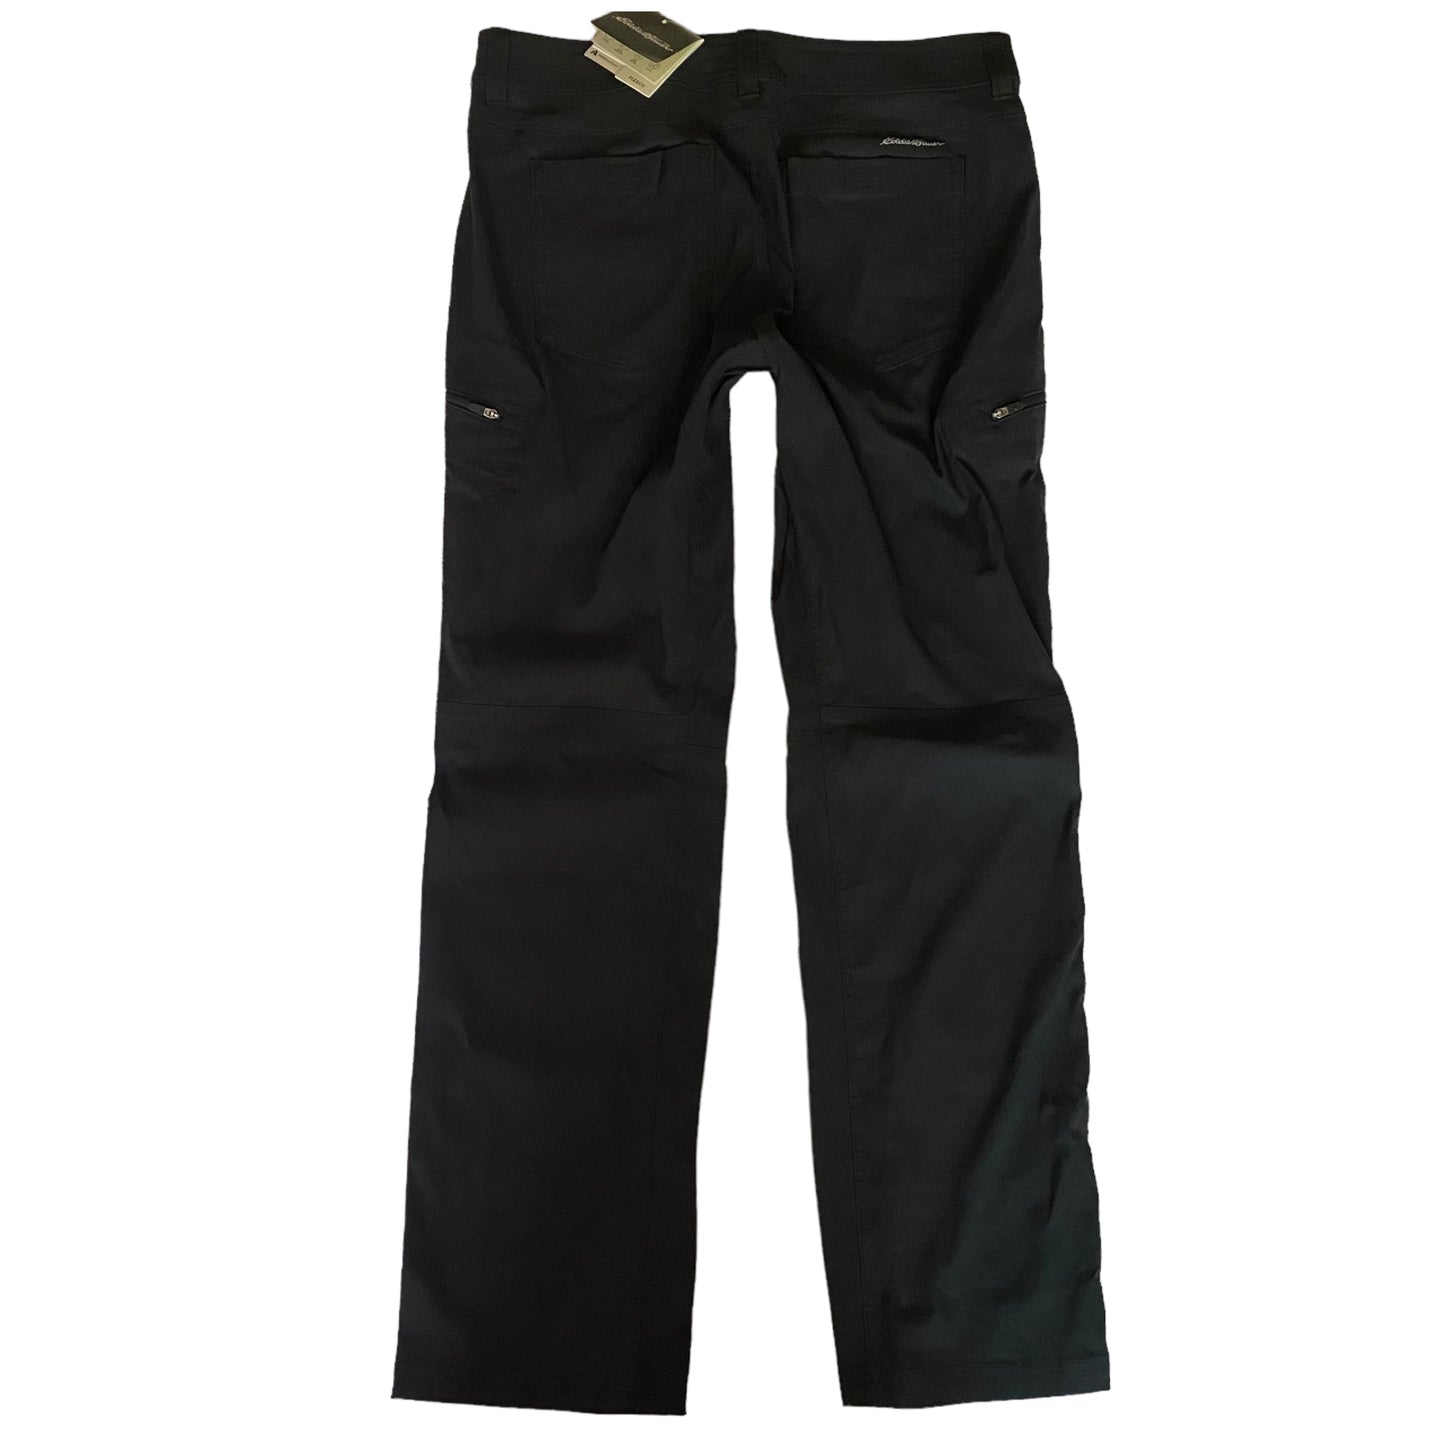 NEW!  Eddie Bauer First Ascent Guide Pro Pants NWT Size 34